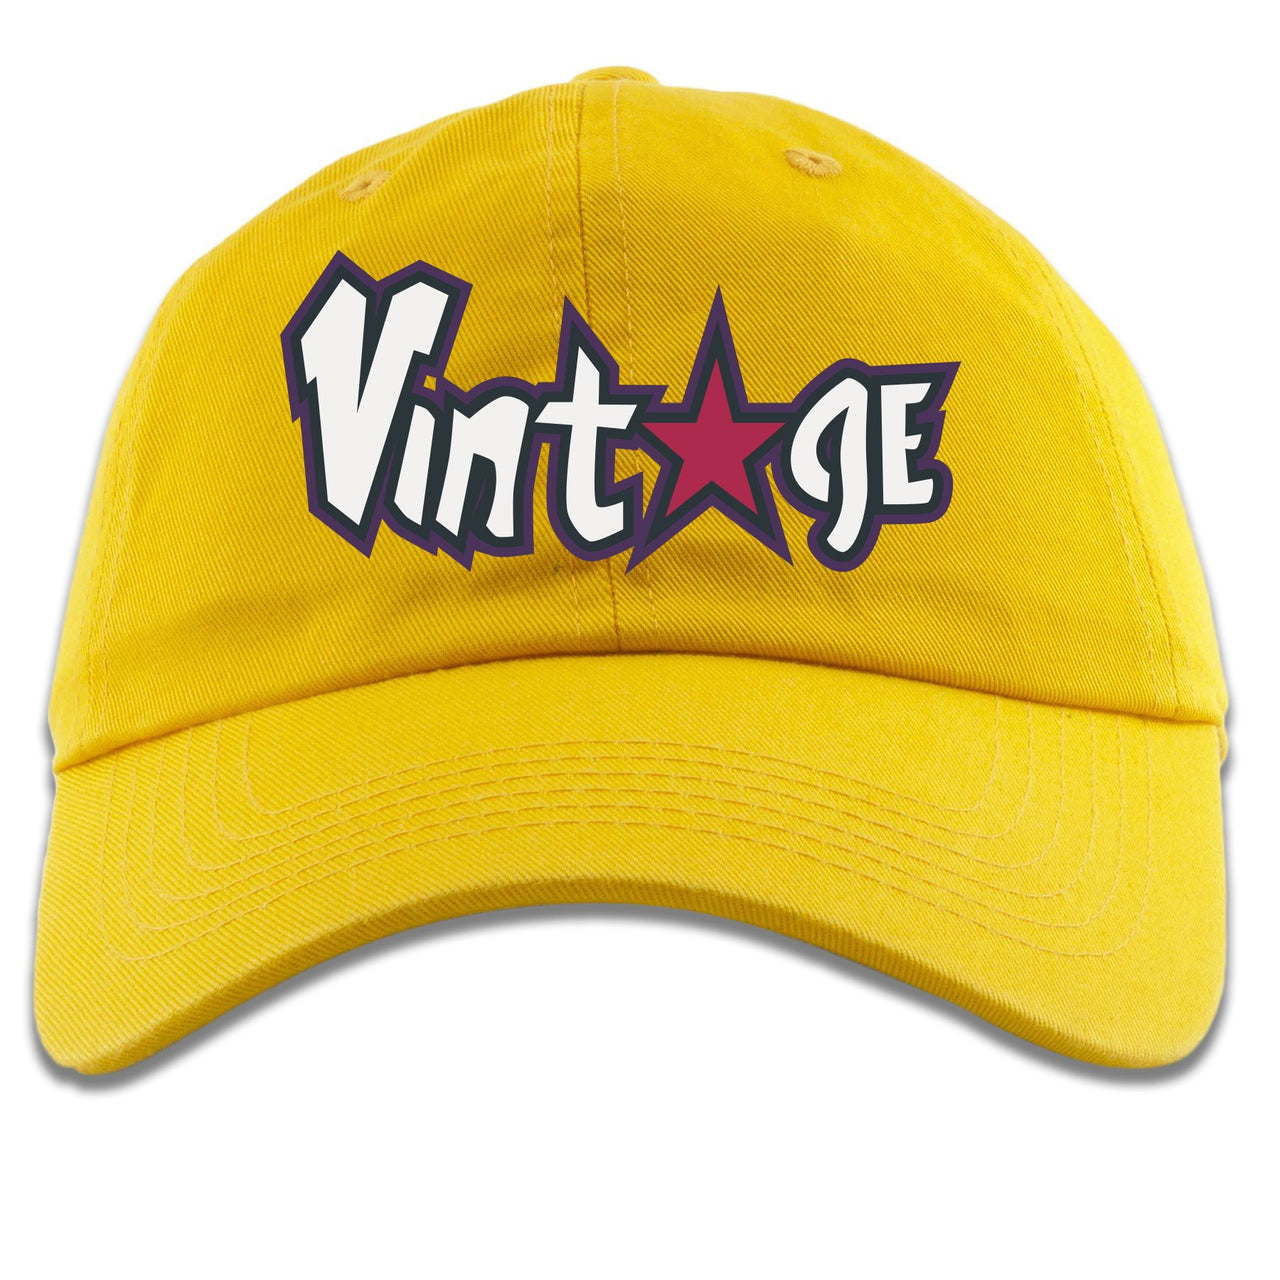 Varsity Maize Mid Blazers Dad Hat | Vintage with Star Logo, Yellow